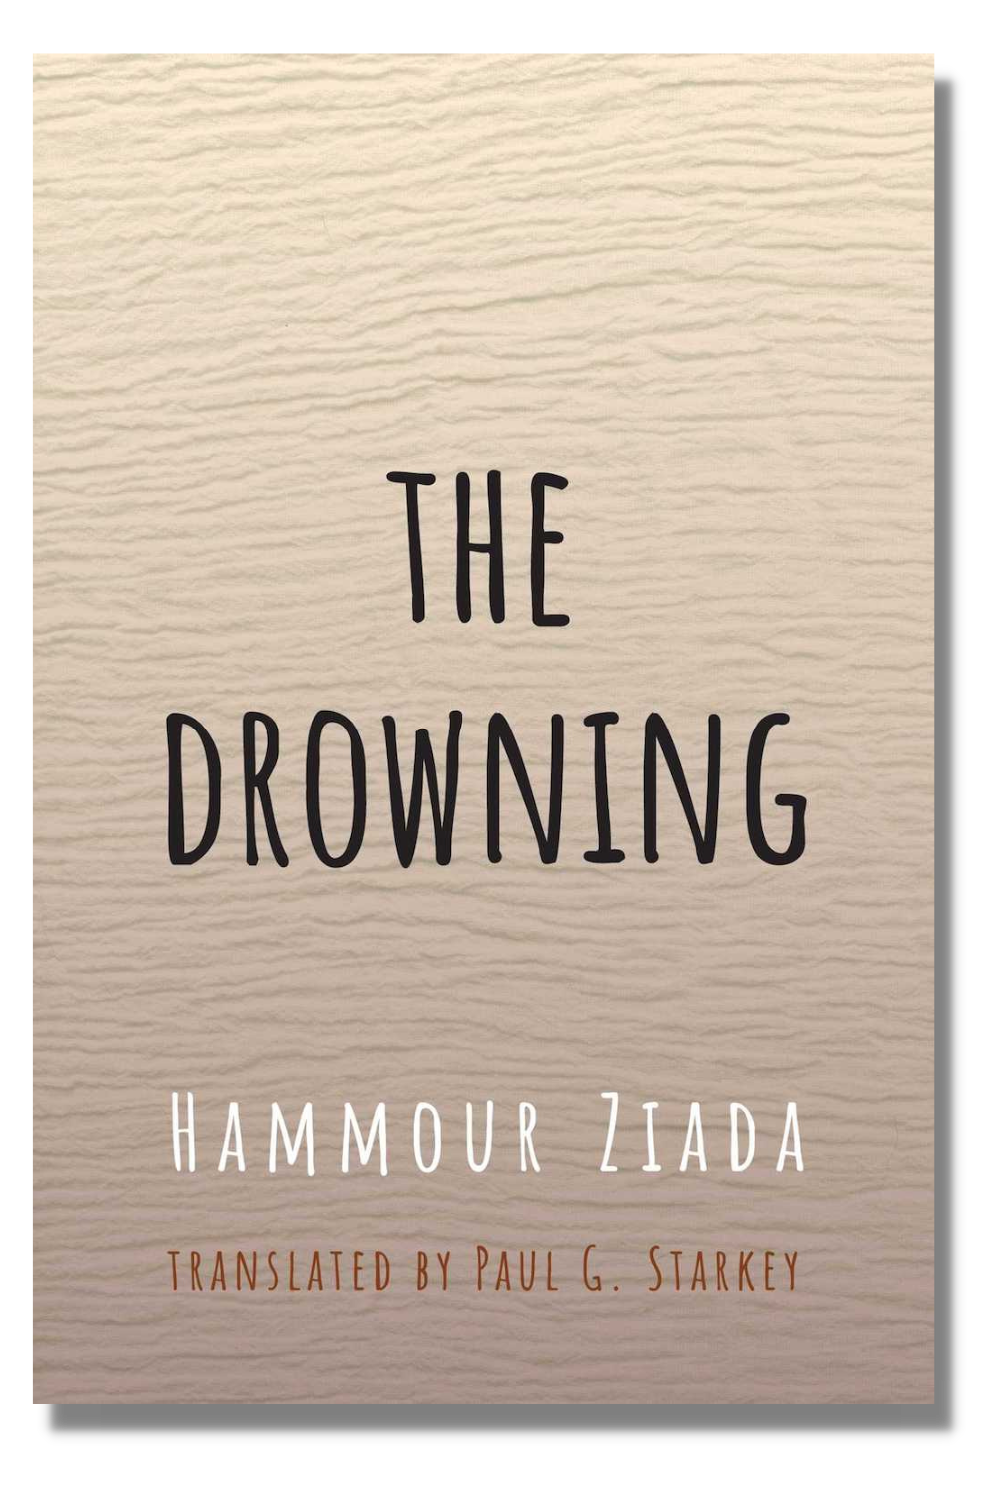 The cover of Hammour Ziada's "The Drowning," tr. Paul Starkey